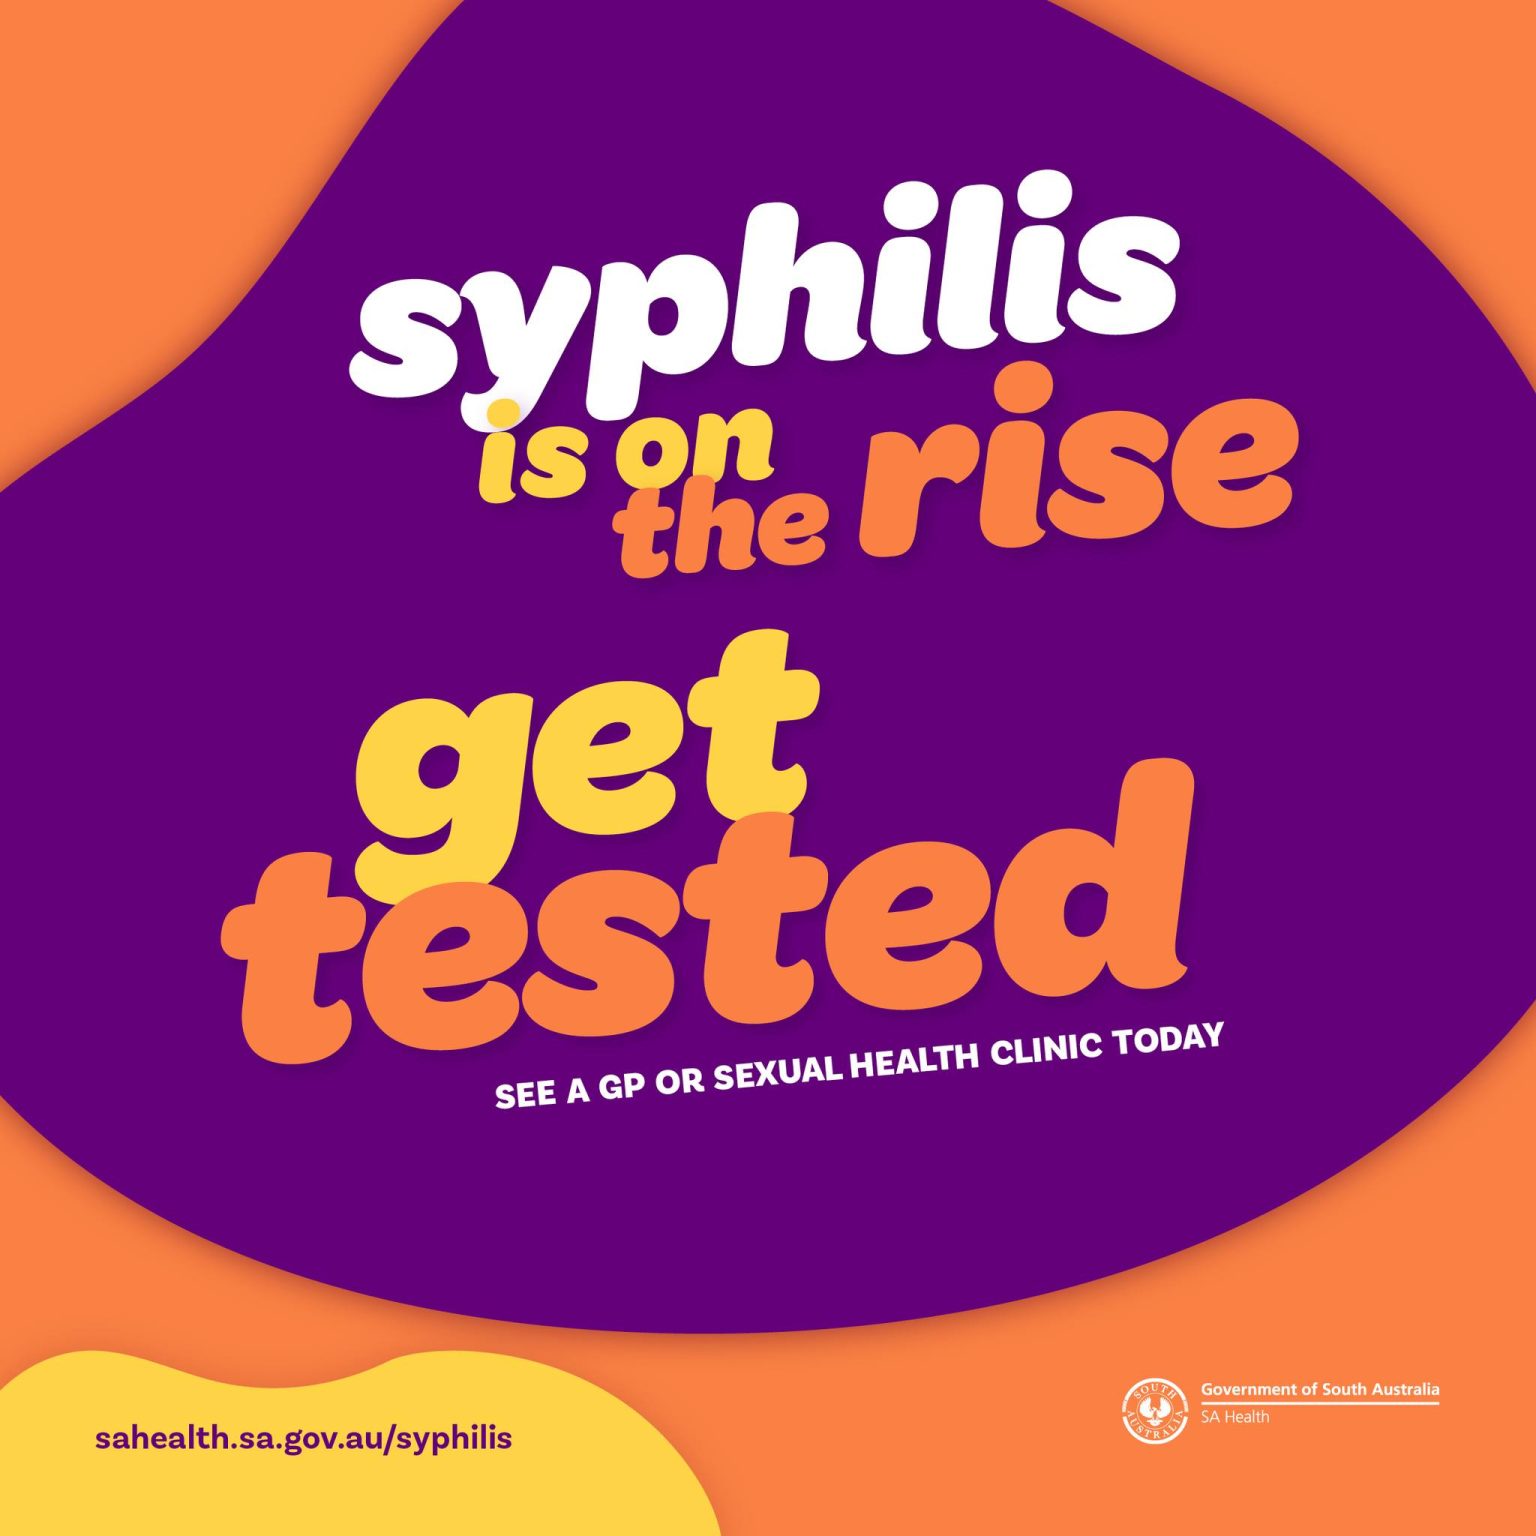 Syphilis is on the rise Ask PEACE